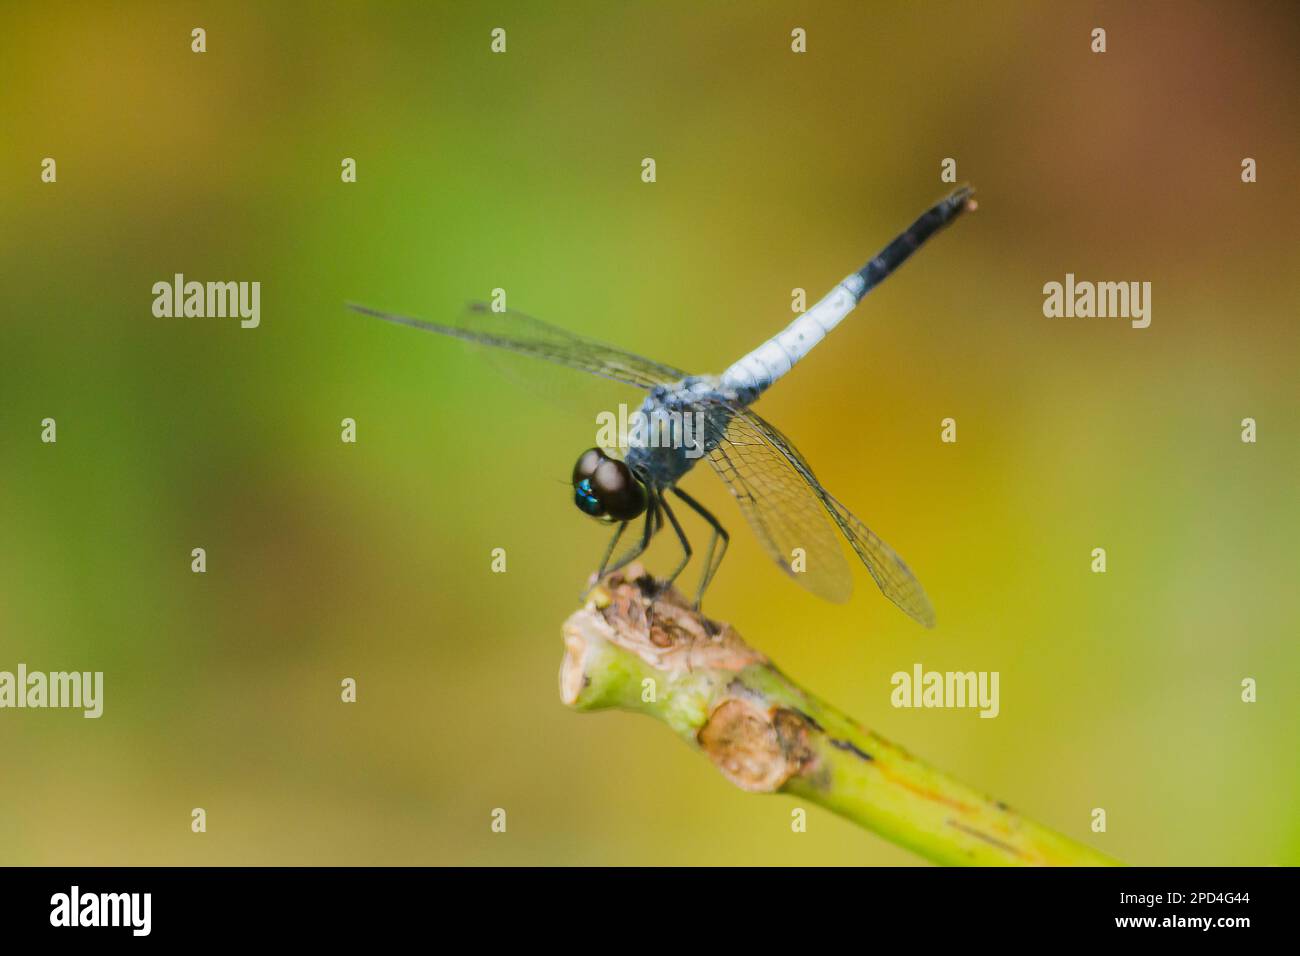 A blue dragonfly on a dry branch To spread wings to rely on the sun to rest the journe Stock Photo